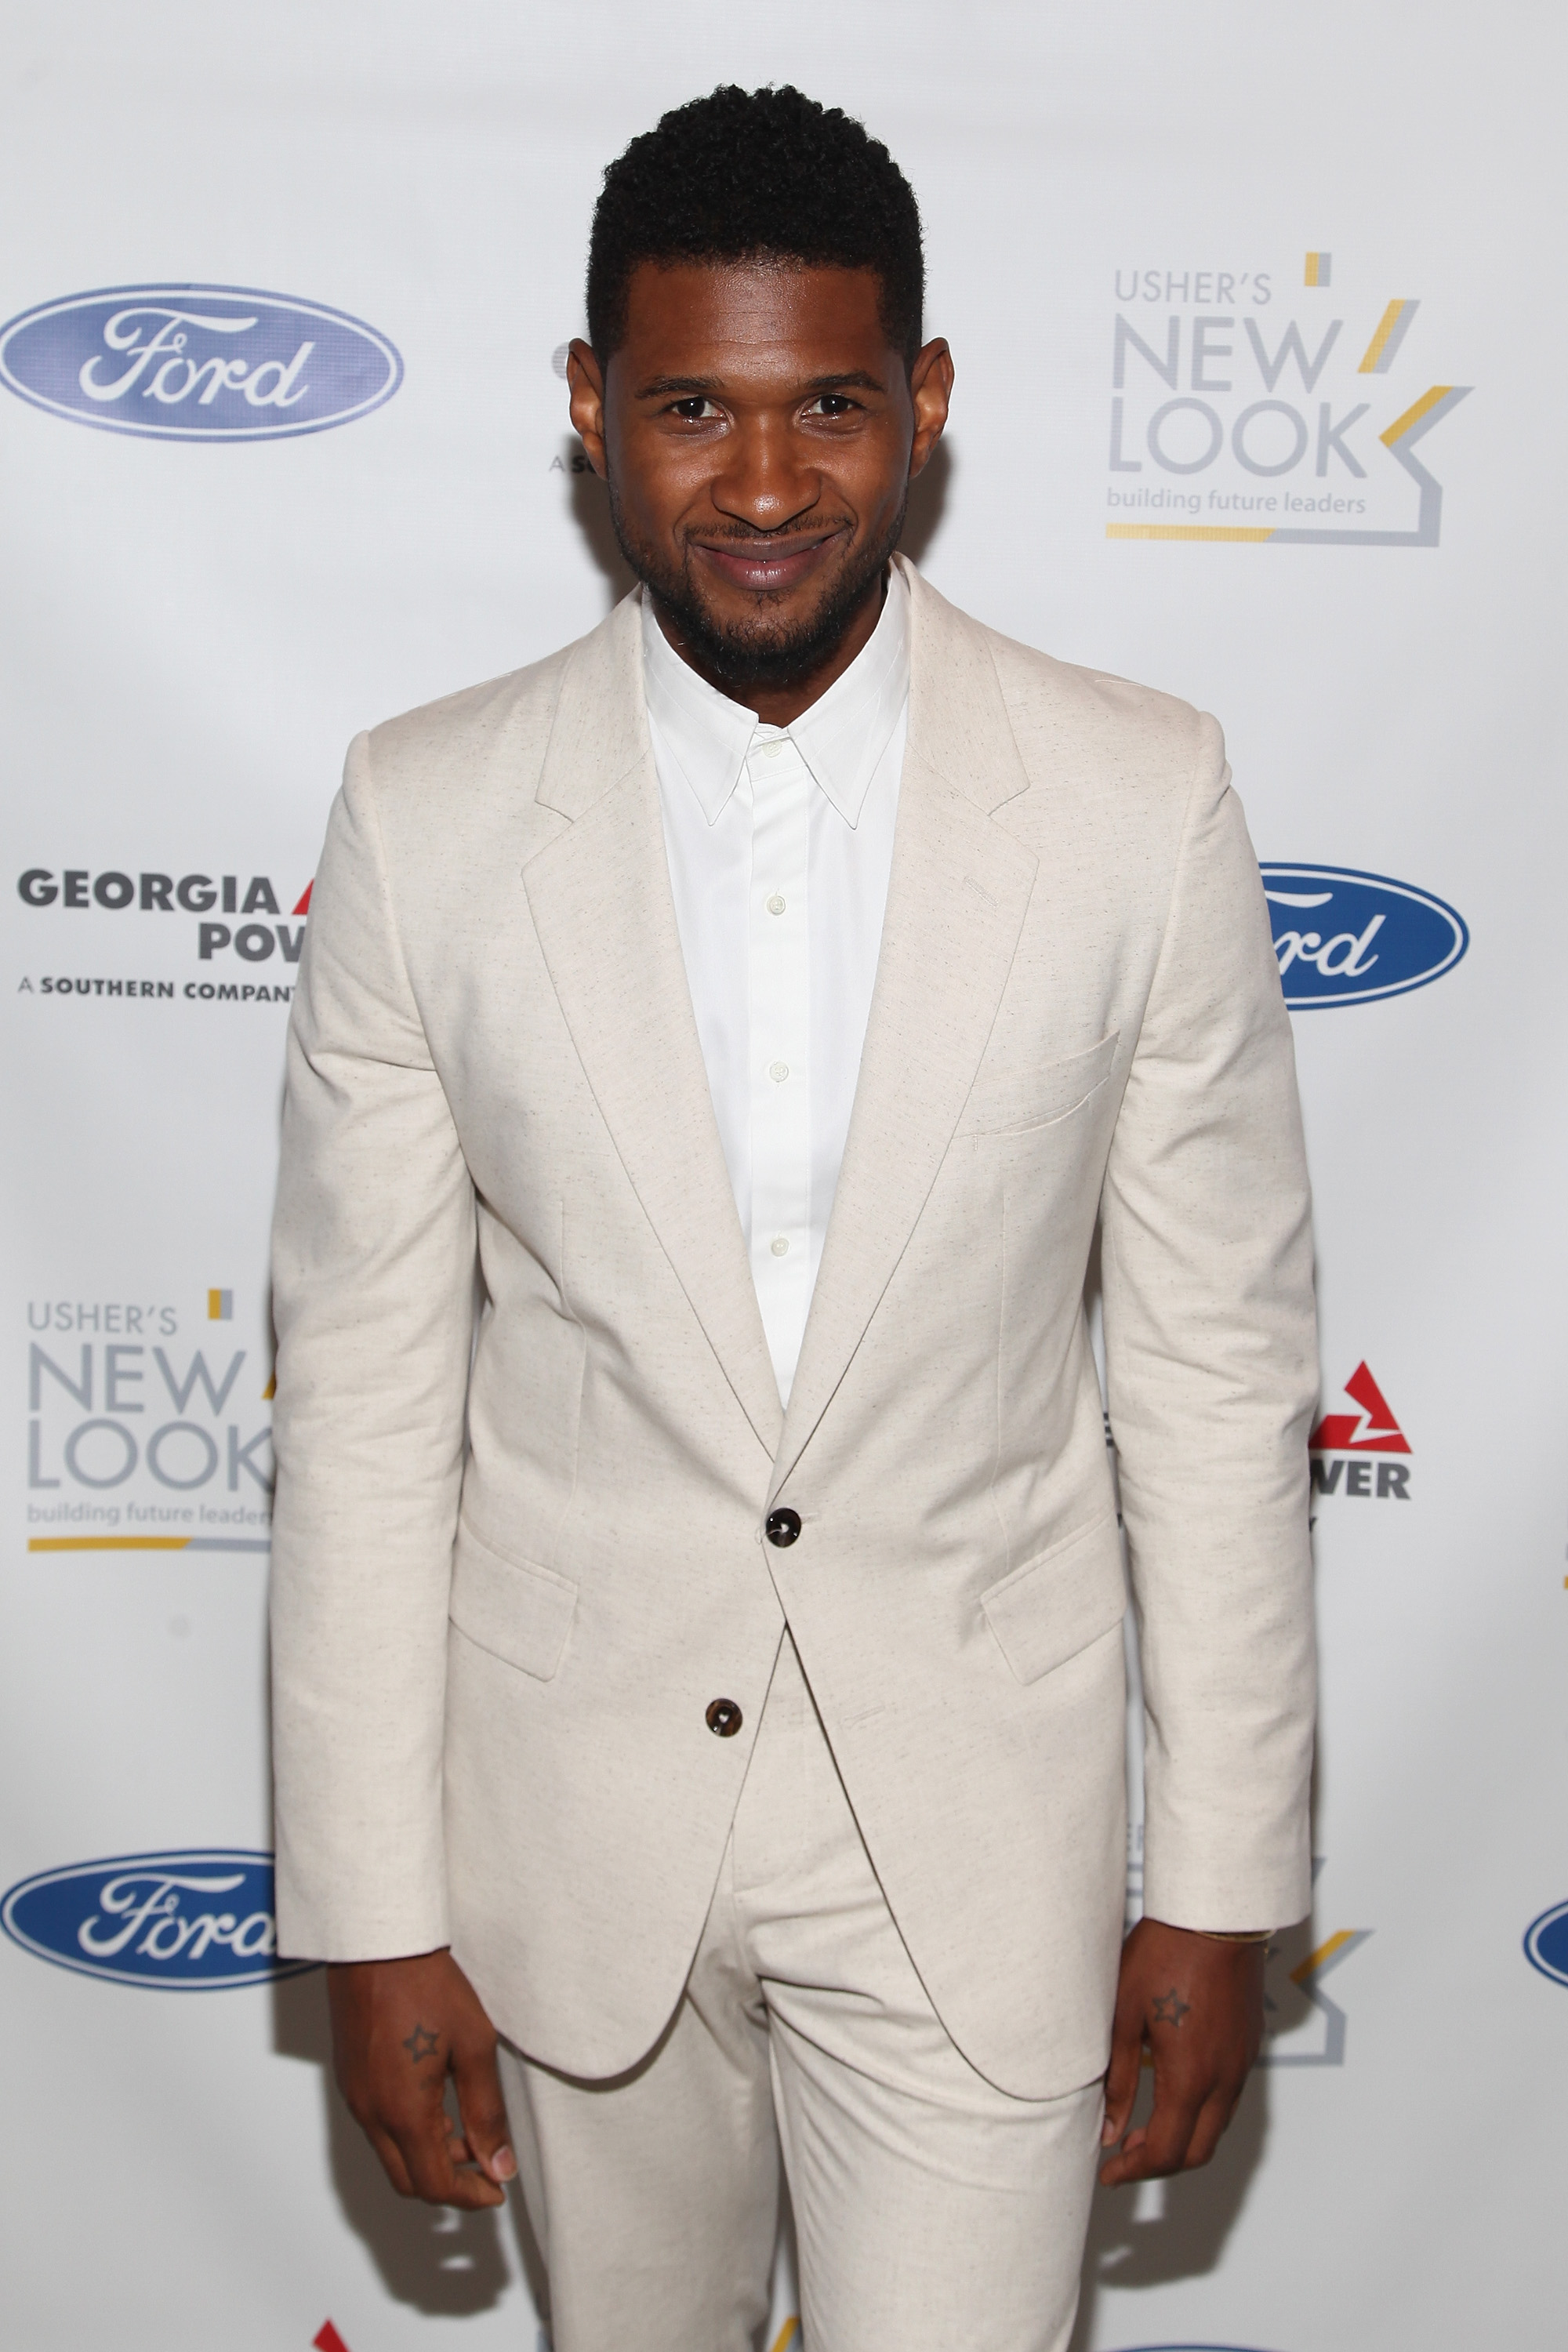 Usher's New Look Hosts 2013 President's Circle Awards Luncheon | Black ...